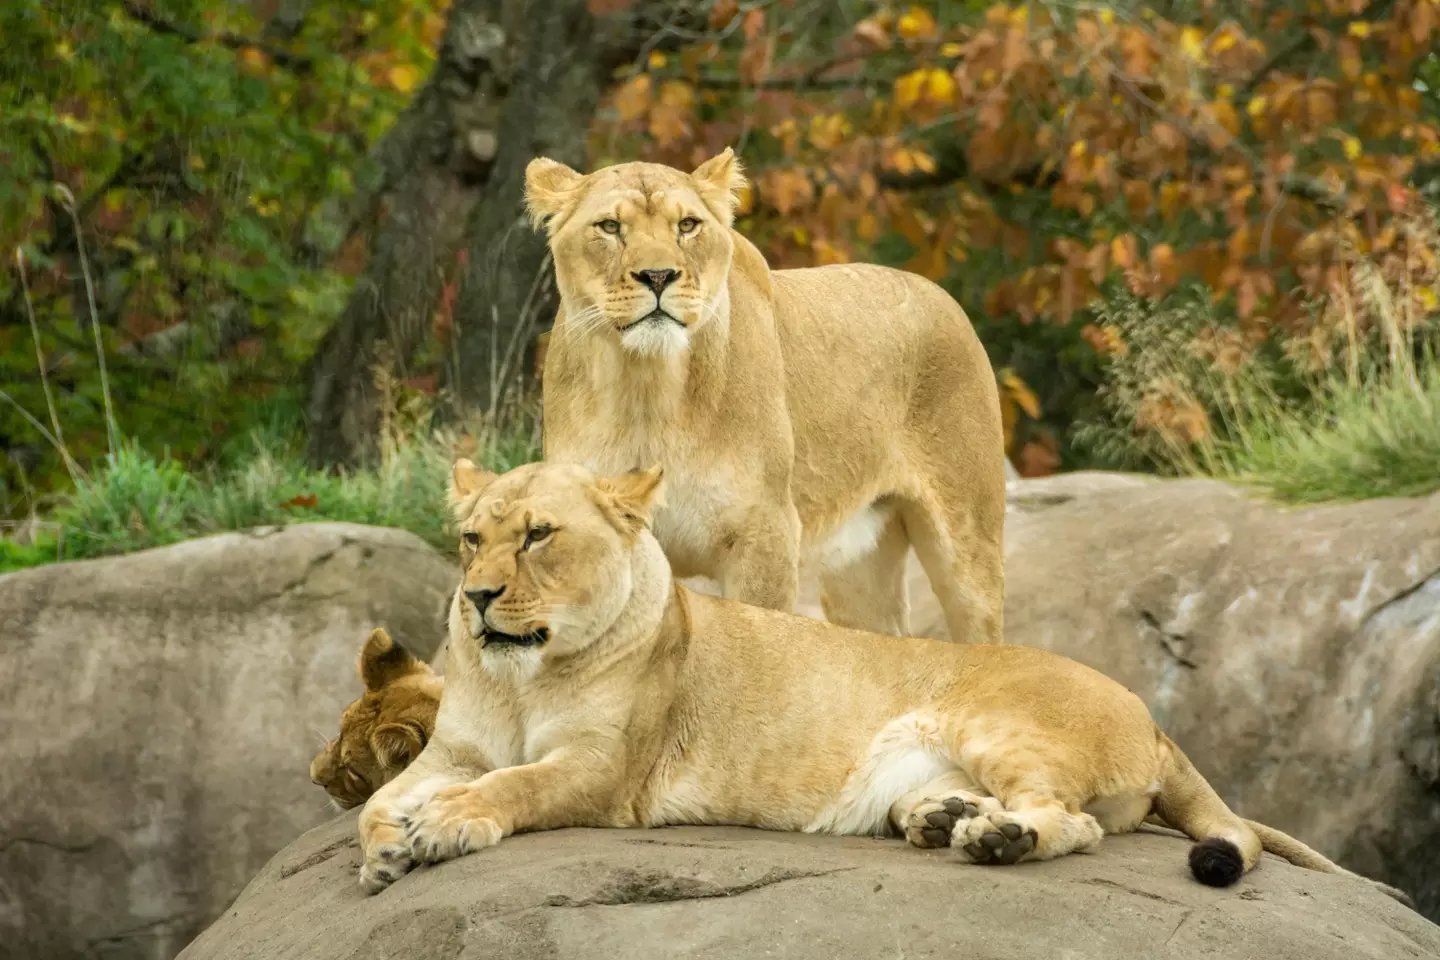 The lions survived but are now roaming free as their enclosure was destroyed.